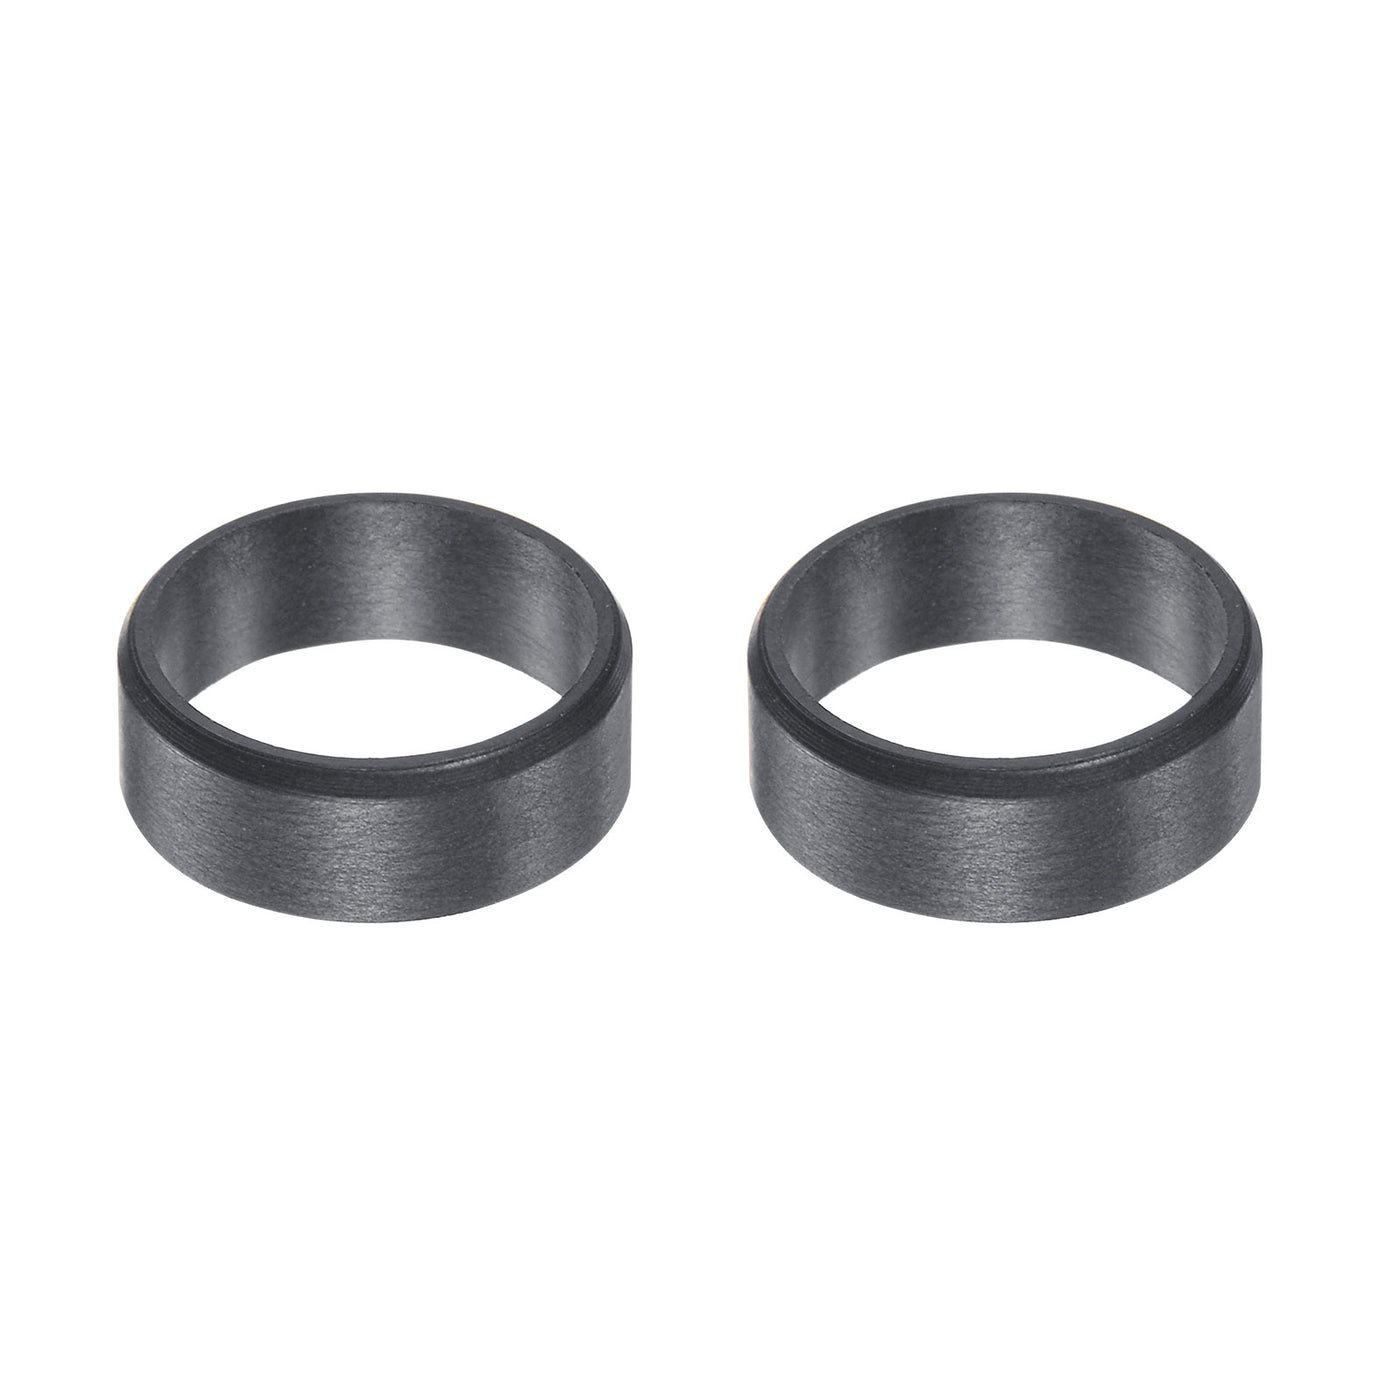 uxcell Uxcell Sleeve Bearings 12mmx14mmx5mm POM Wrapped Oilless Bushings Black 2pcs